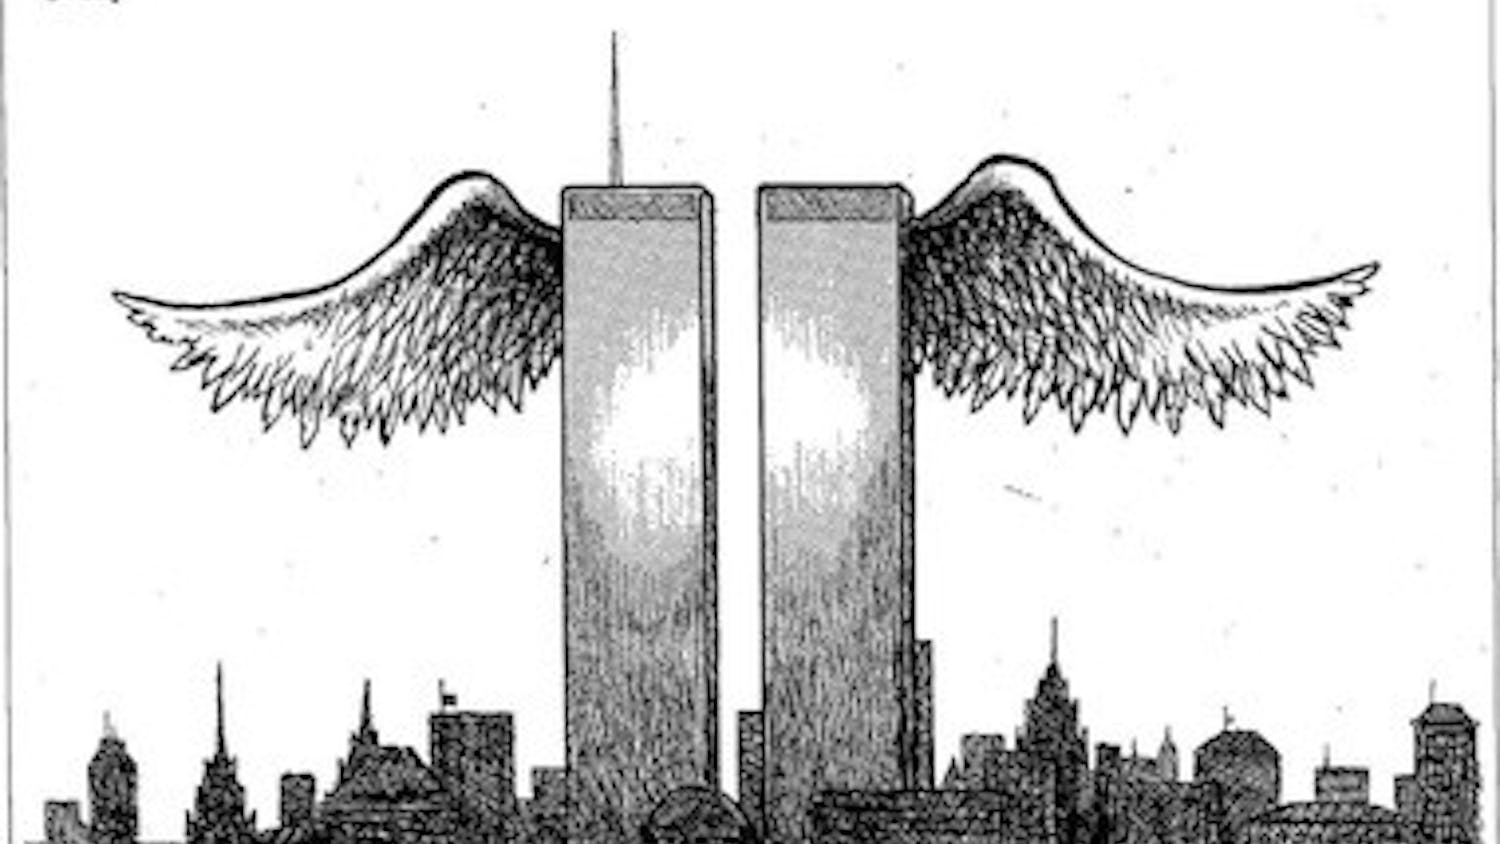 An editorial cartoon that appeared in The Eagle soon after the Sept. 11, 2001, terrorist attacks.